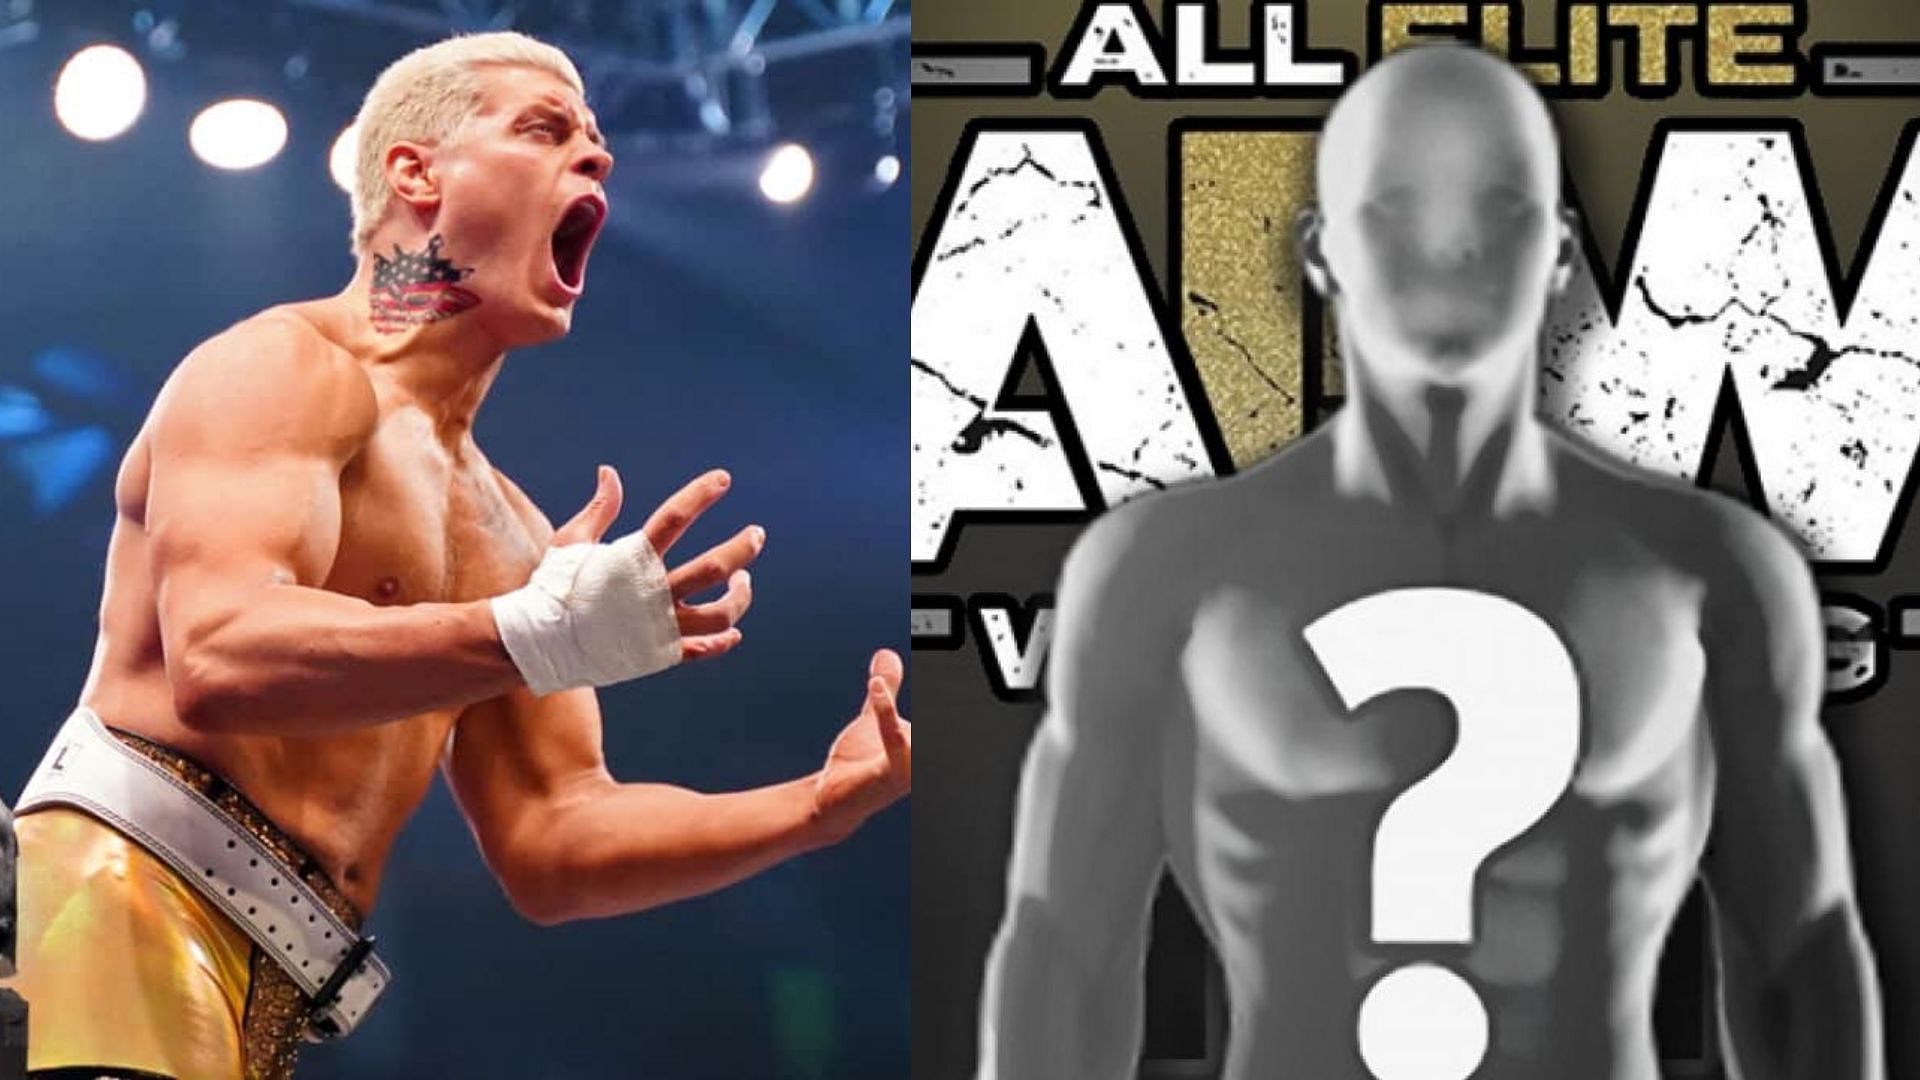 Could this AEW star become the focal point in AEW?